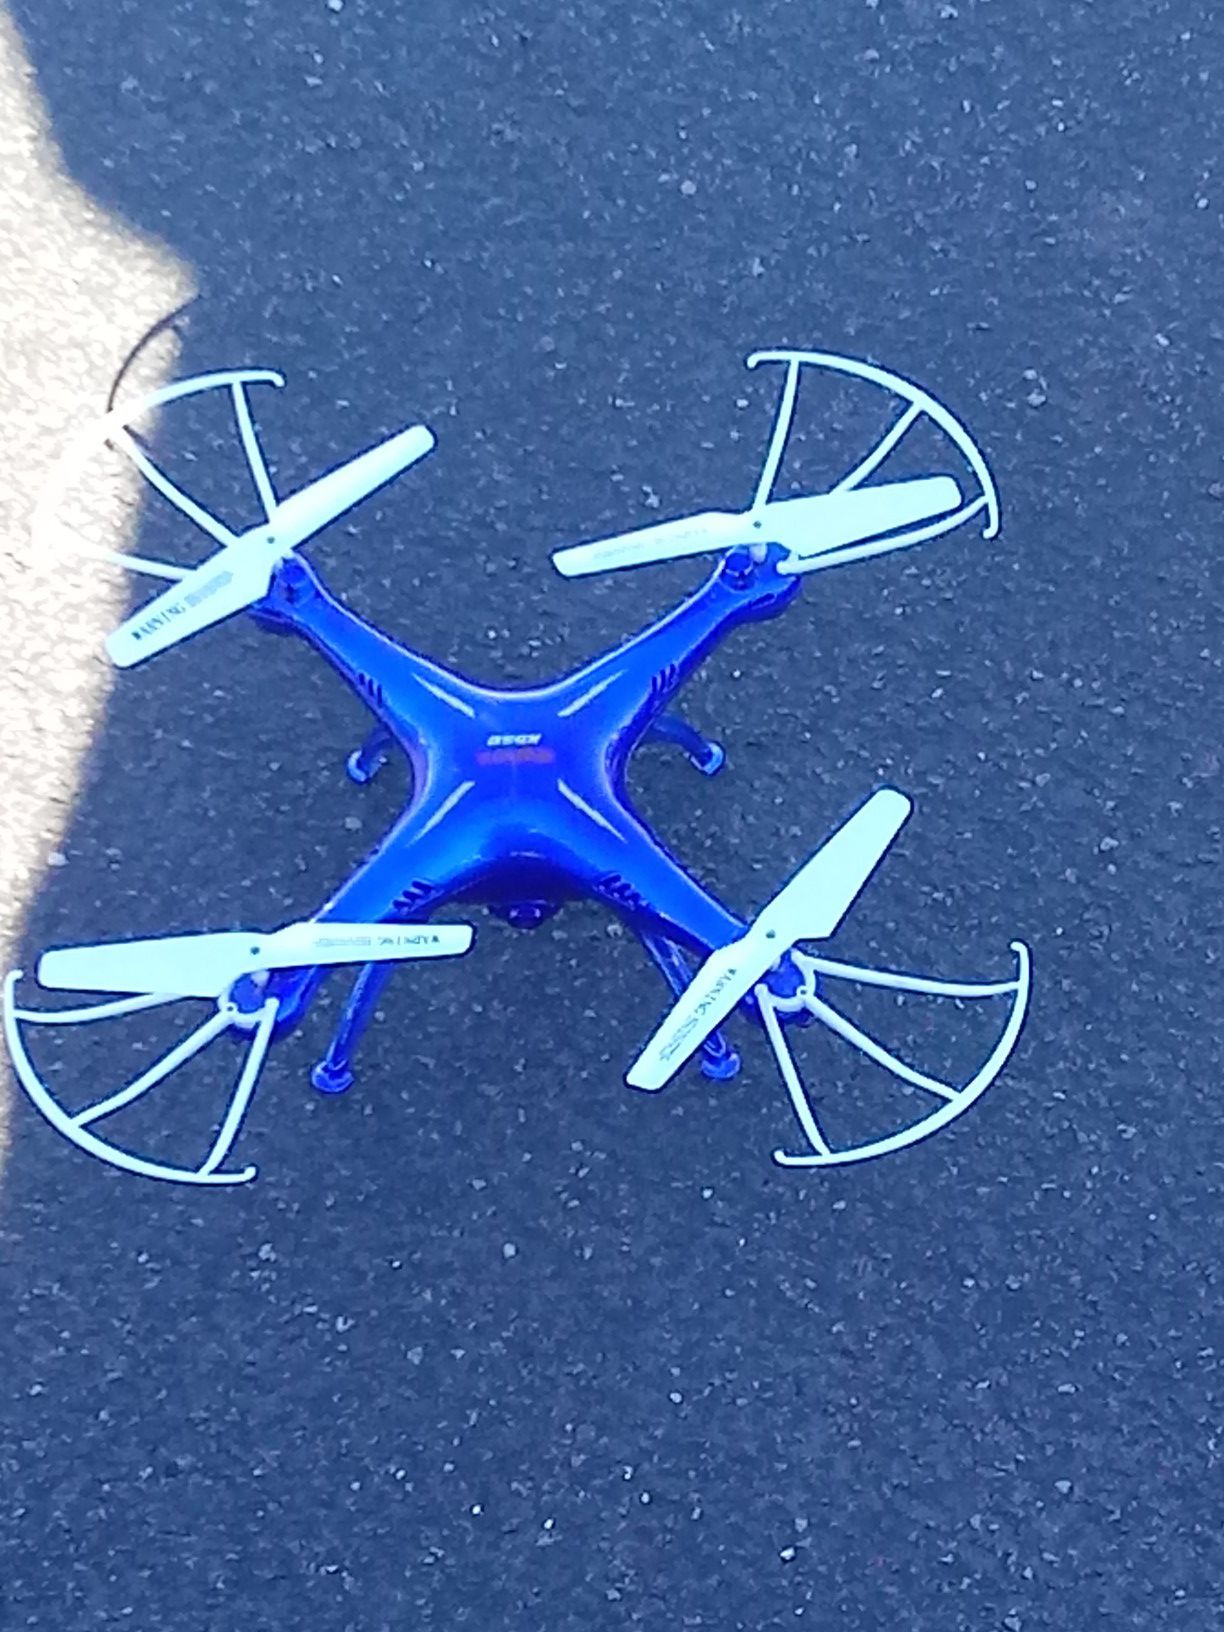 Drone with camera.works great